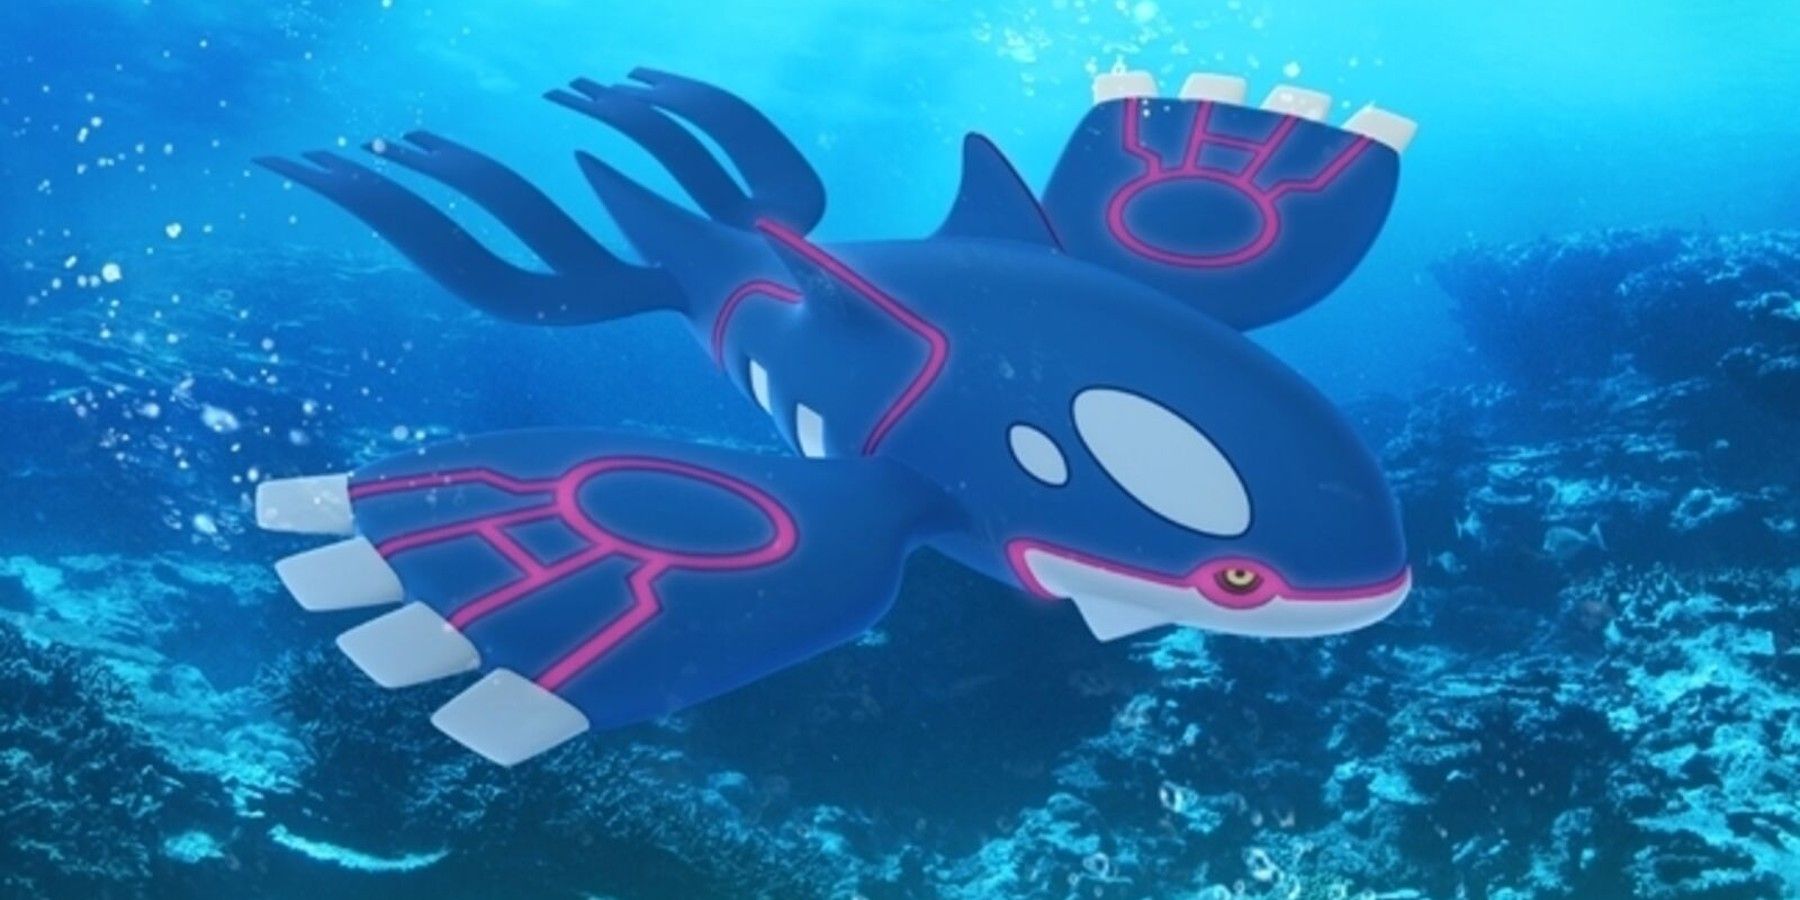 Pokemon Fan Creates Awesome Painting of Kyogre